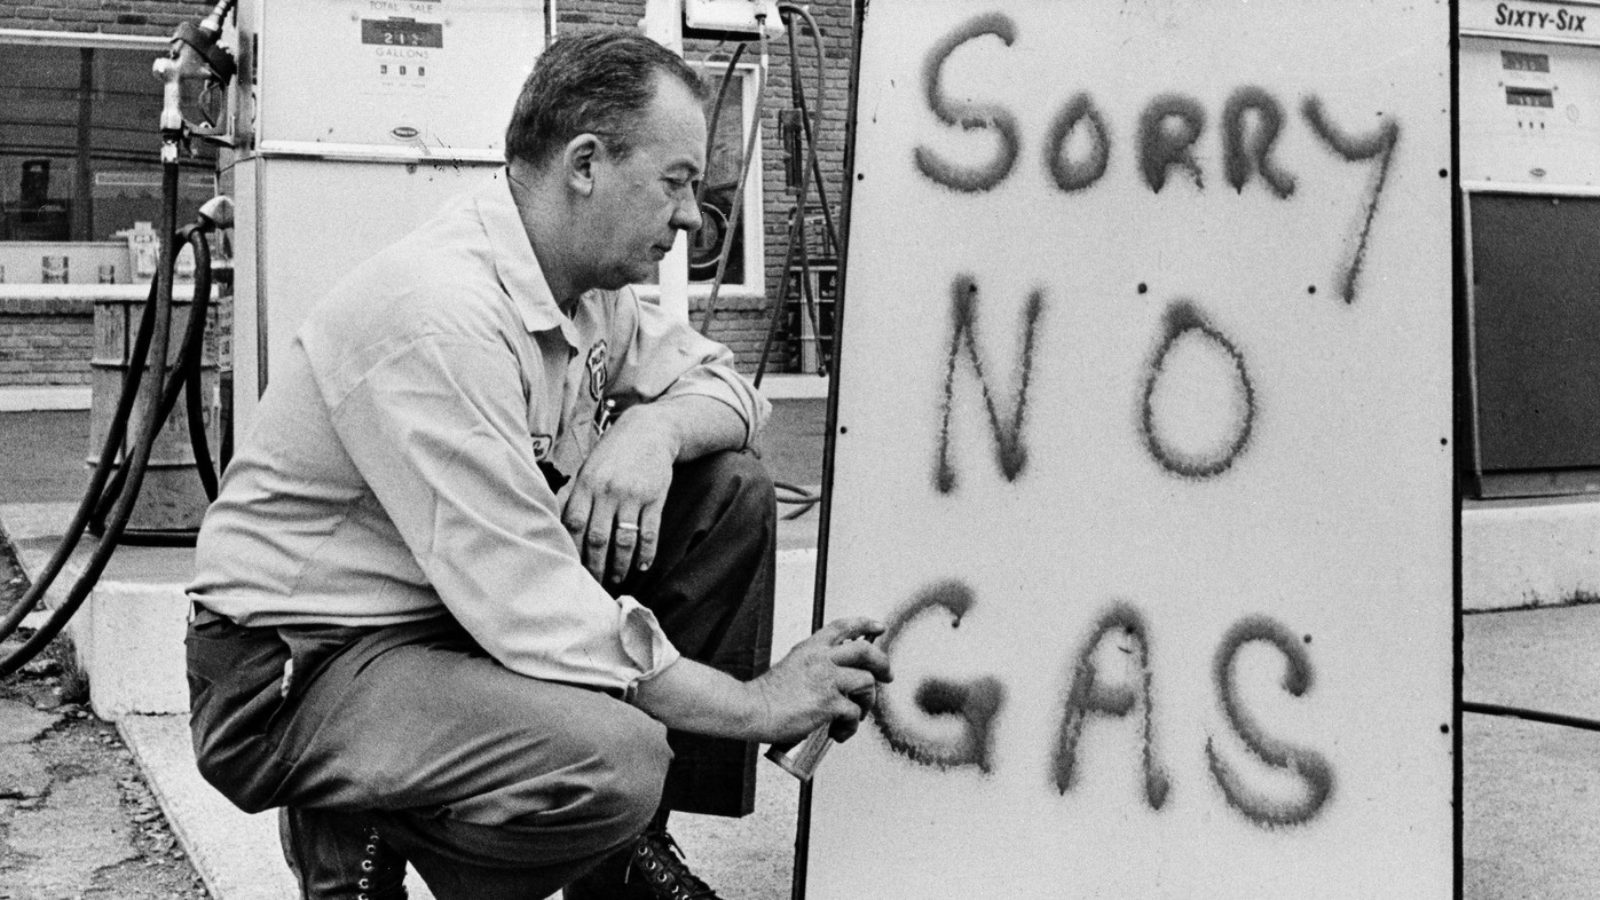 Leon Mill spraying sign saying "Sorry No Gas"